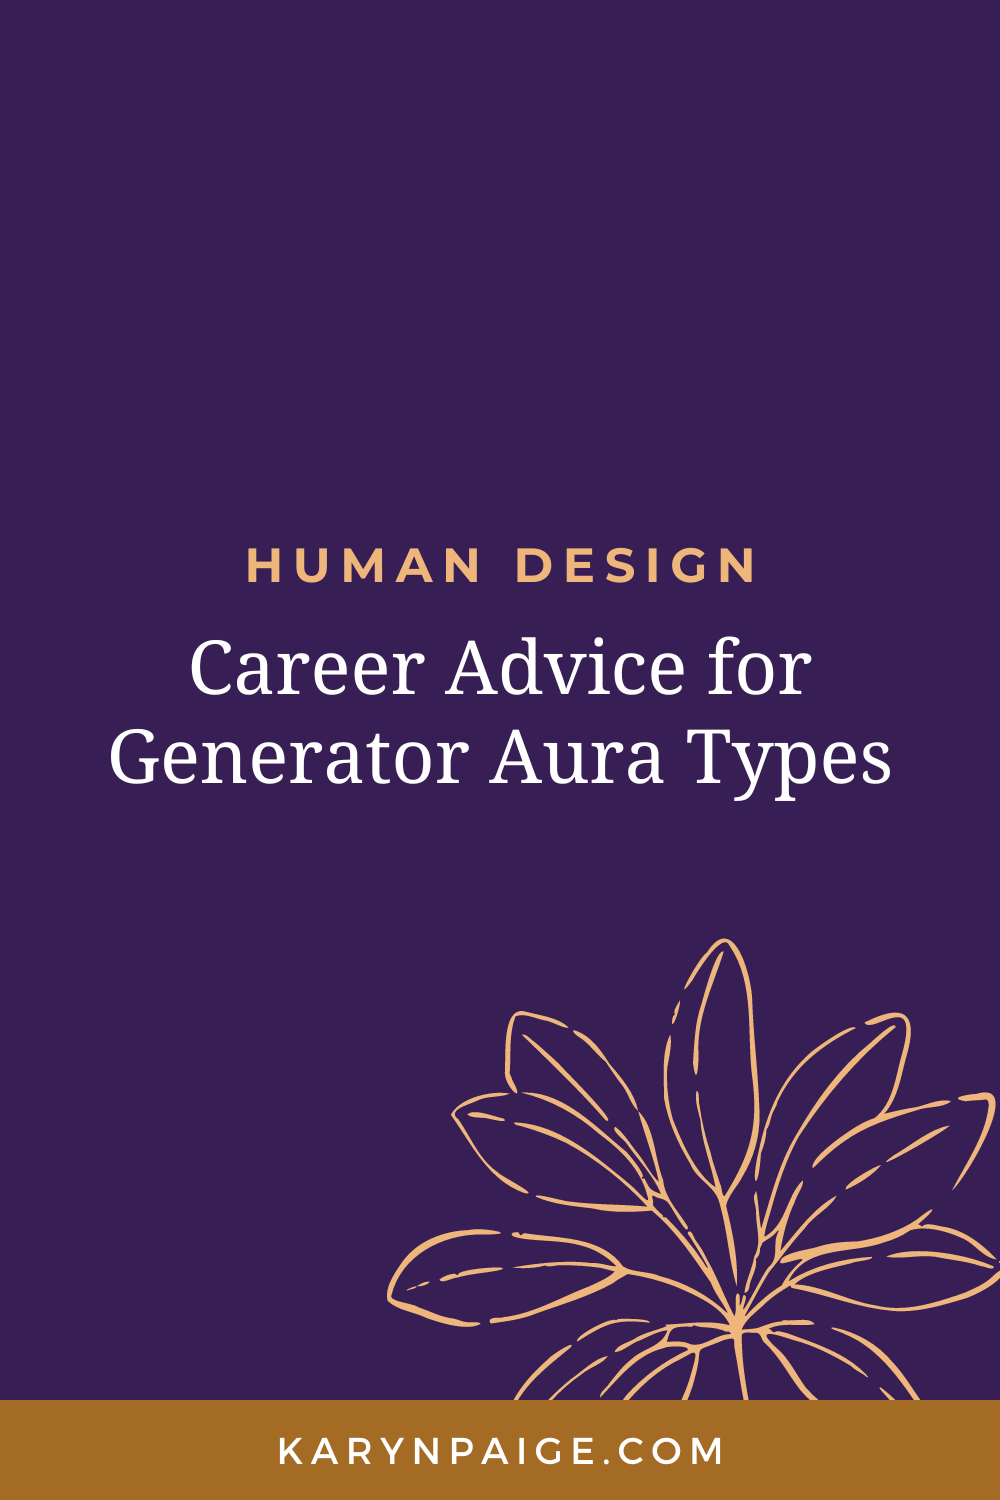 Learn tips for finding a fulfilling, satisfying career as a Generator aura type. Written by Karyn Paige, Human Design coach for Women of Color. www.karynpaige.com